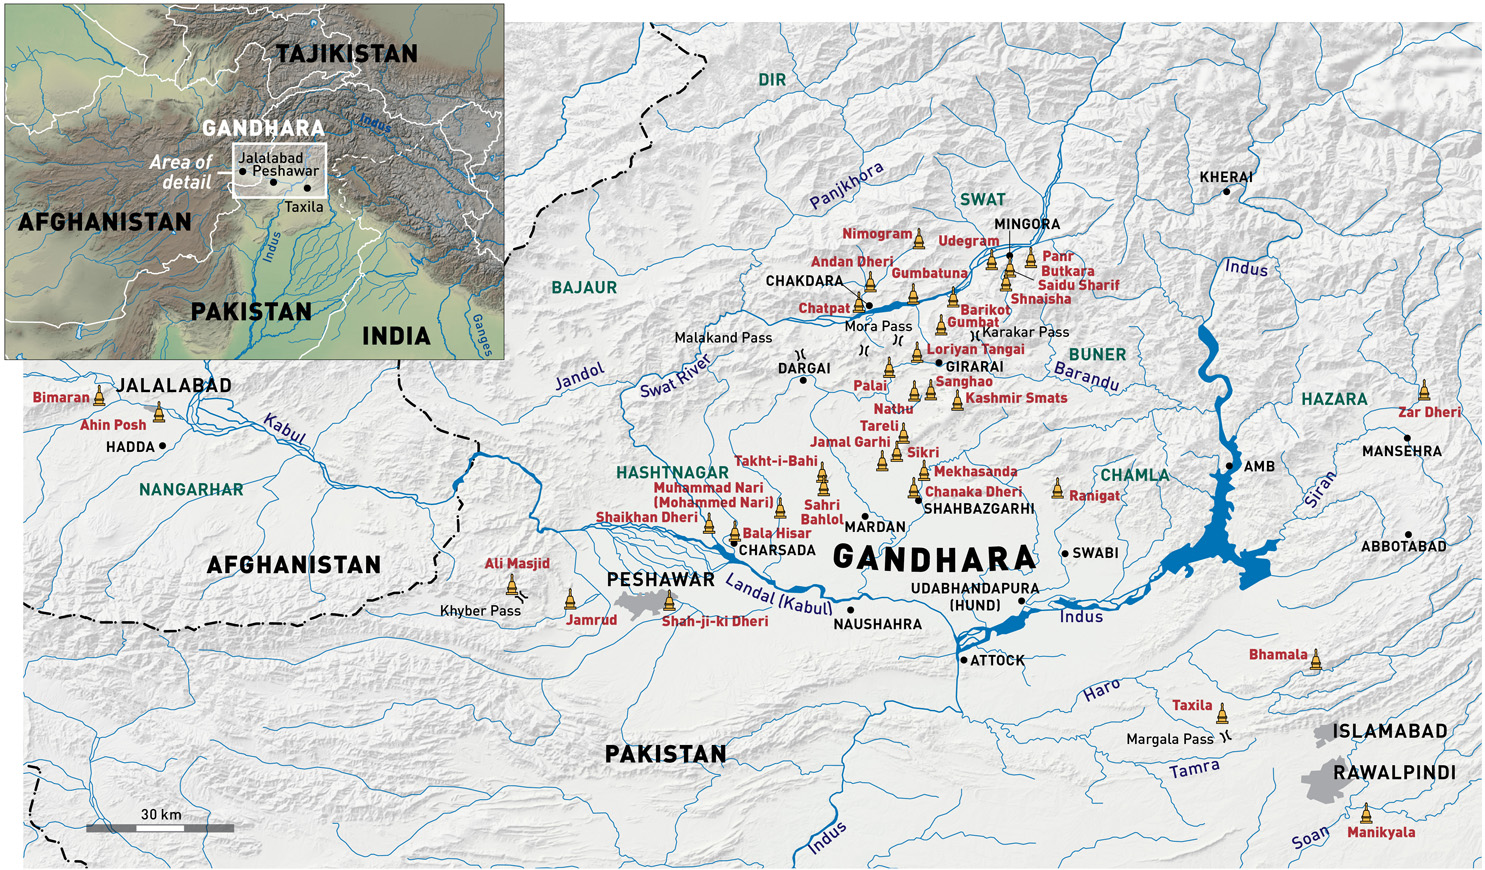 Map showing Gandhara and Swat, with archeological mountain sites in Swat valley North of Gandhara